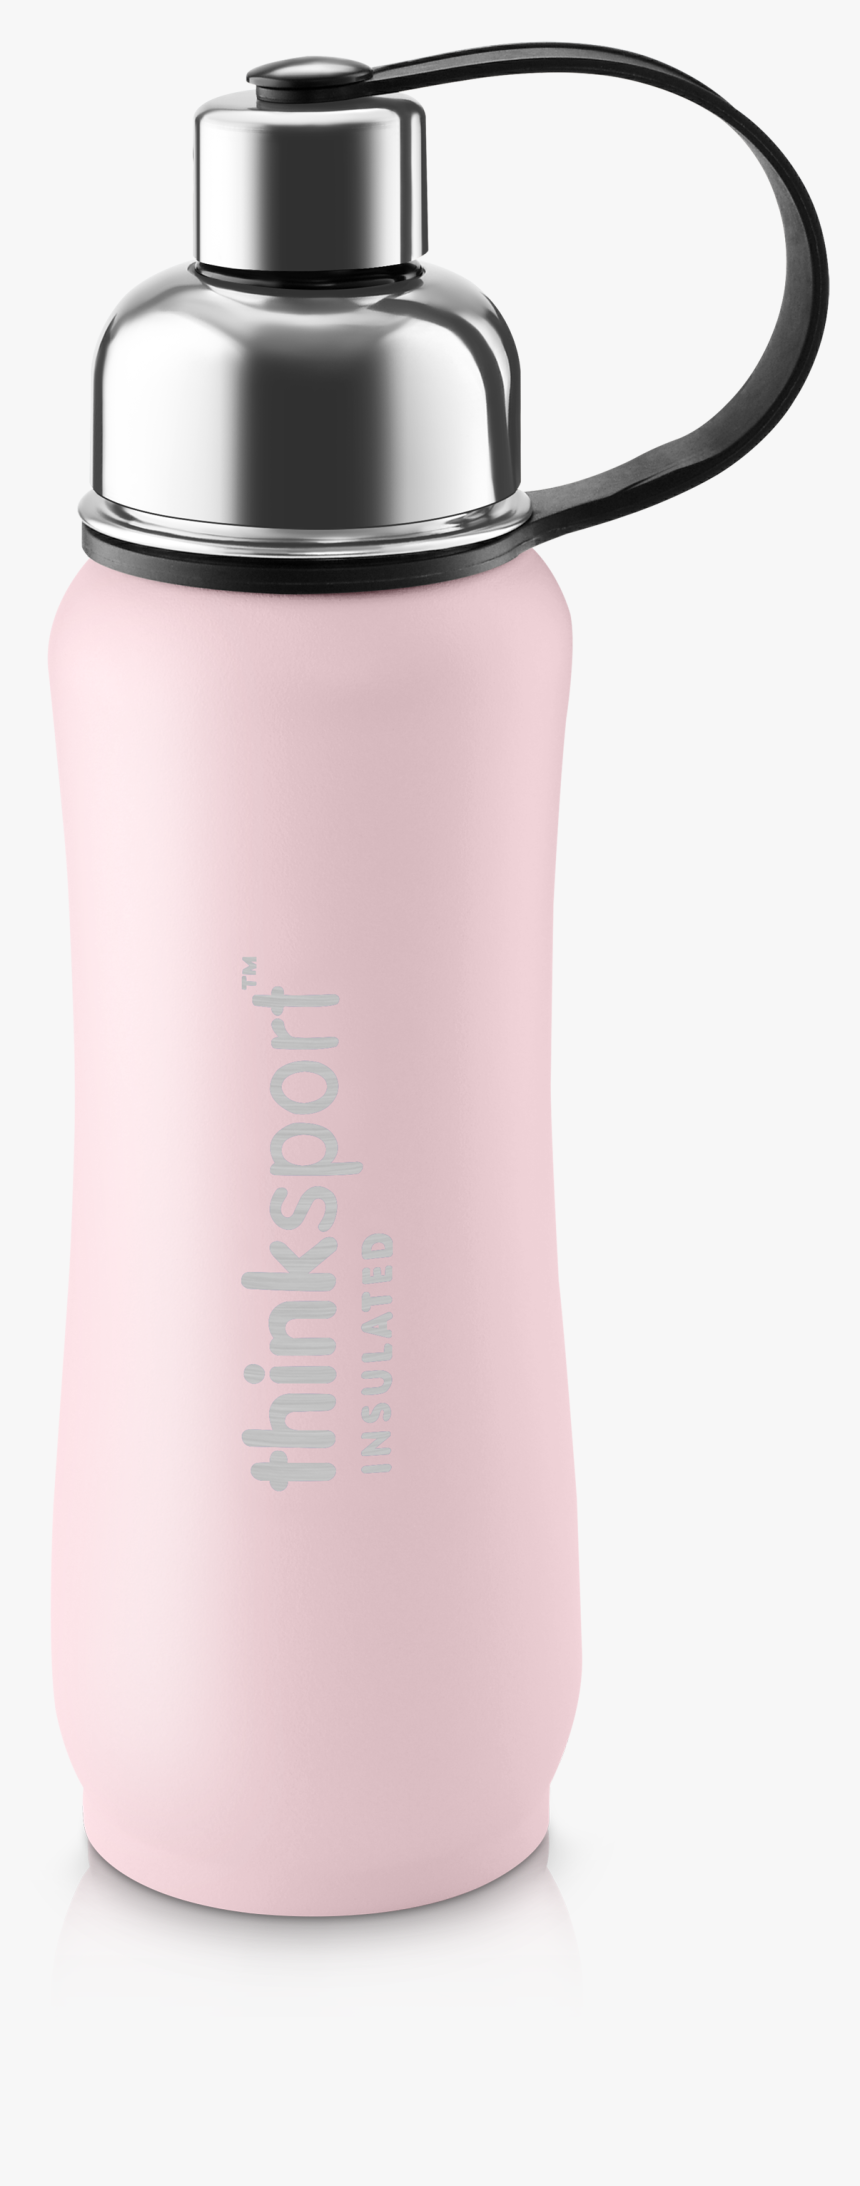 Thinksport Insulated Sports Bottle - Sports Bottle Transparent Background, HD Png Download, Free Download